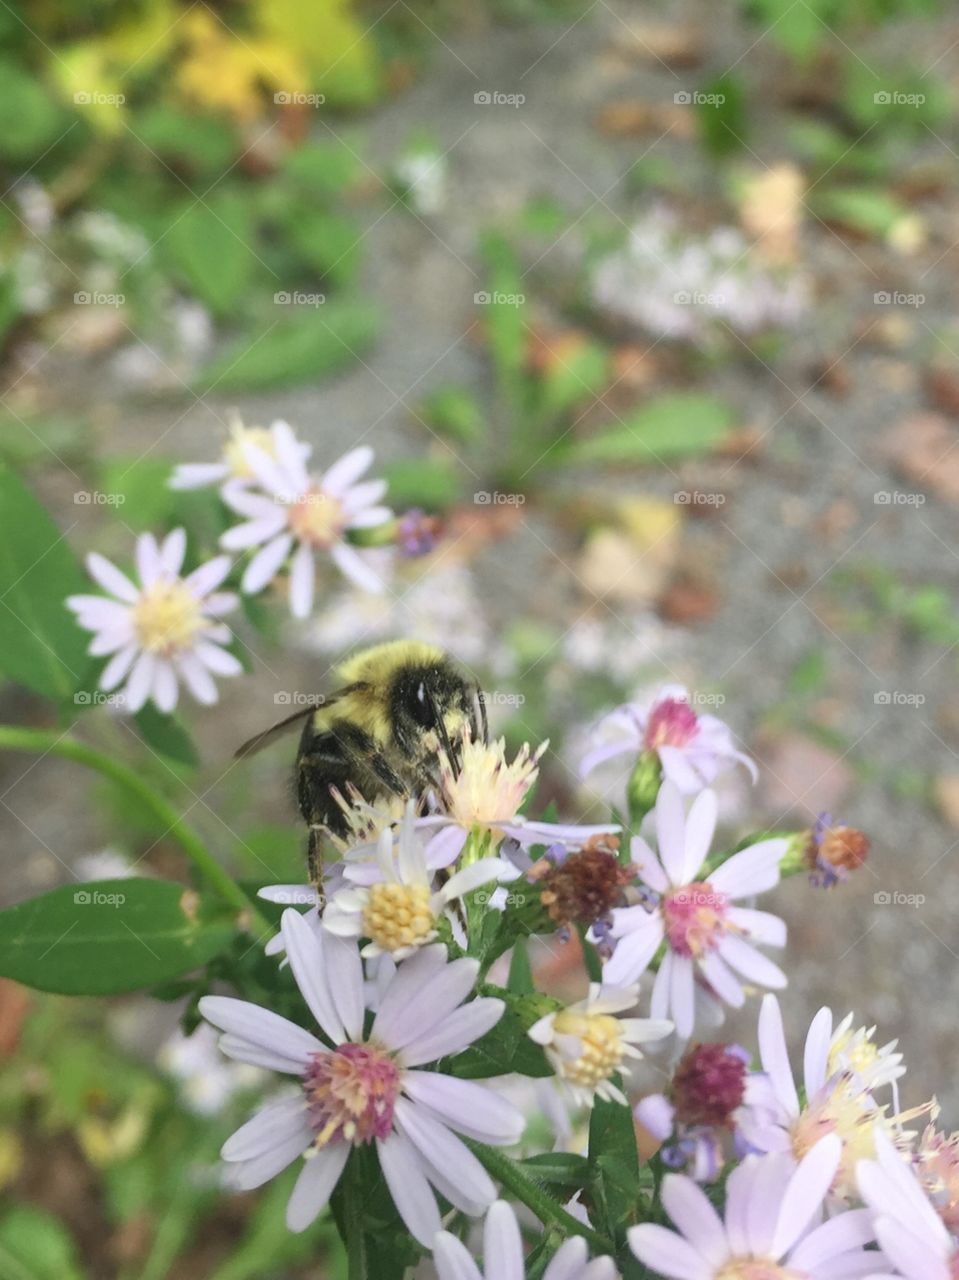 A bee on a flower doing its work